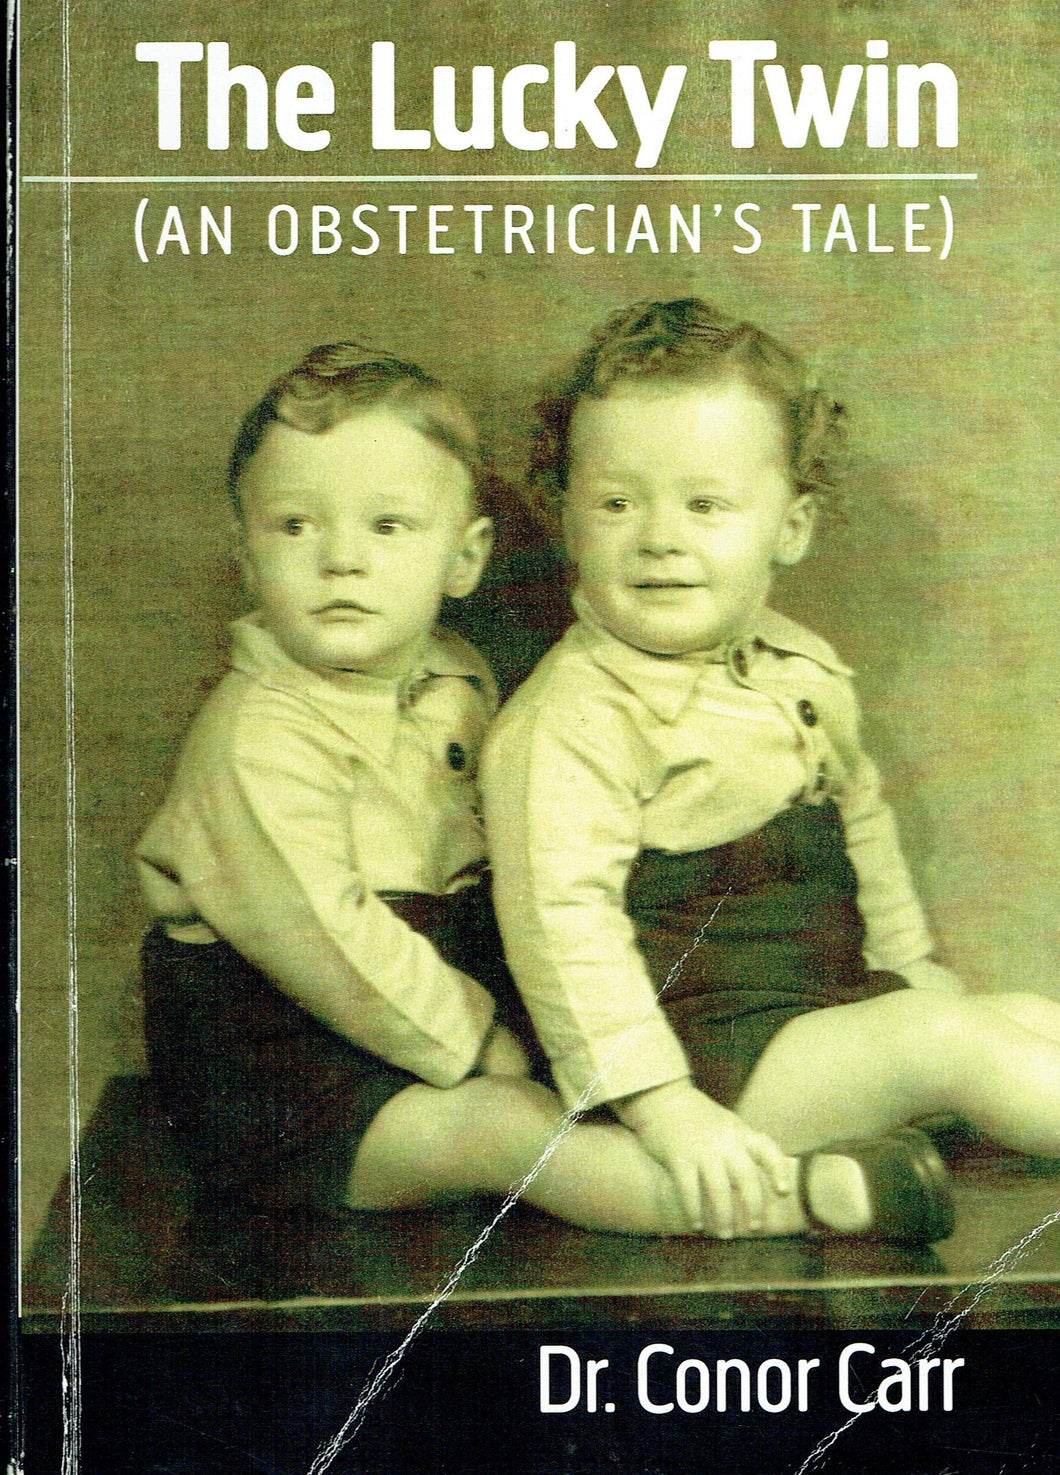 The Lucky Twin: An Obstetrician's Tale